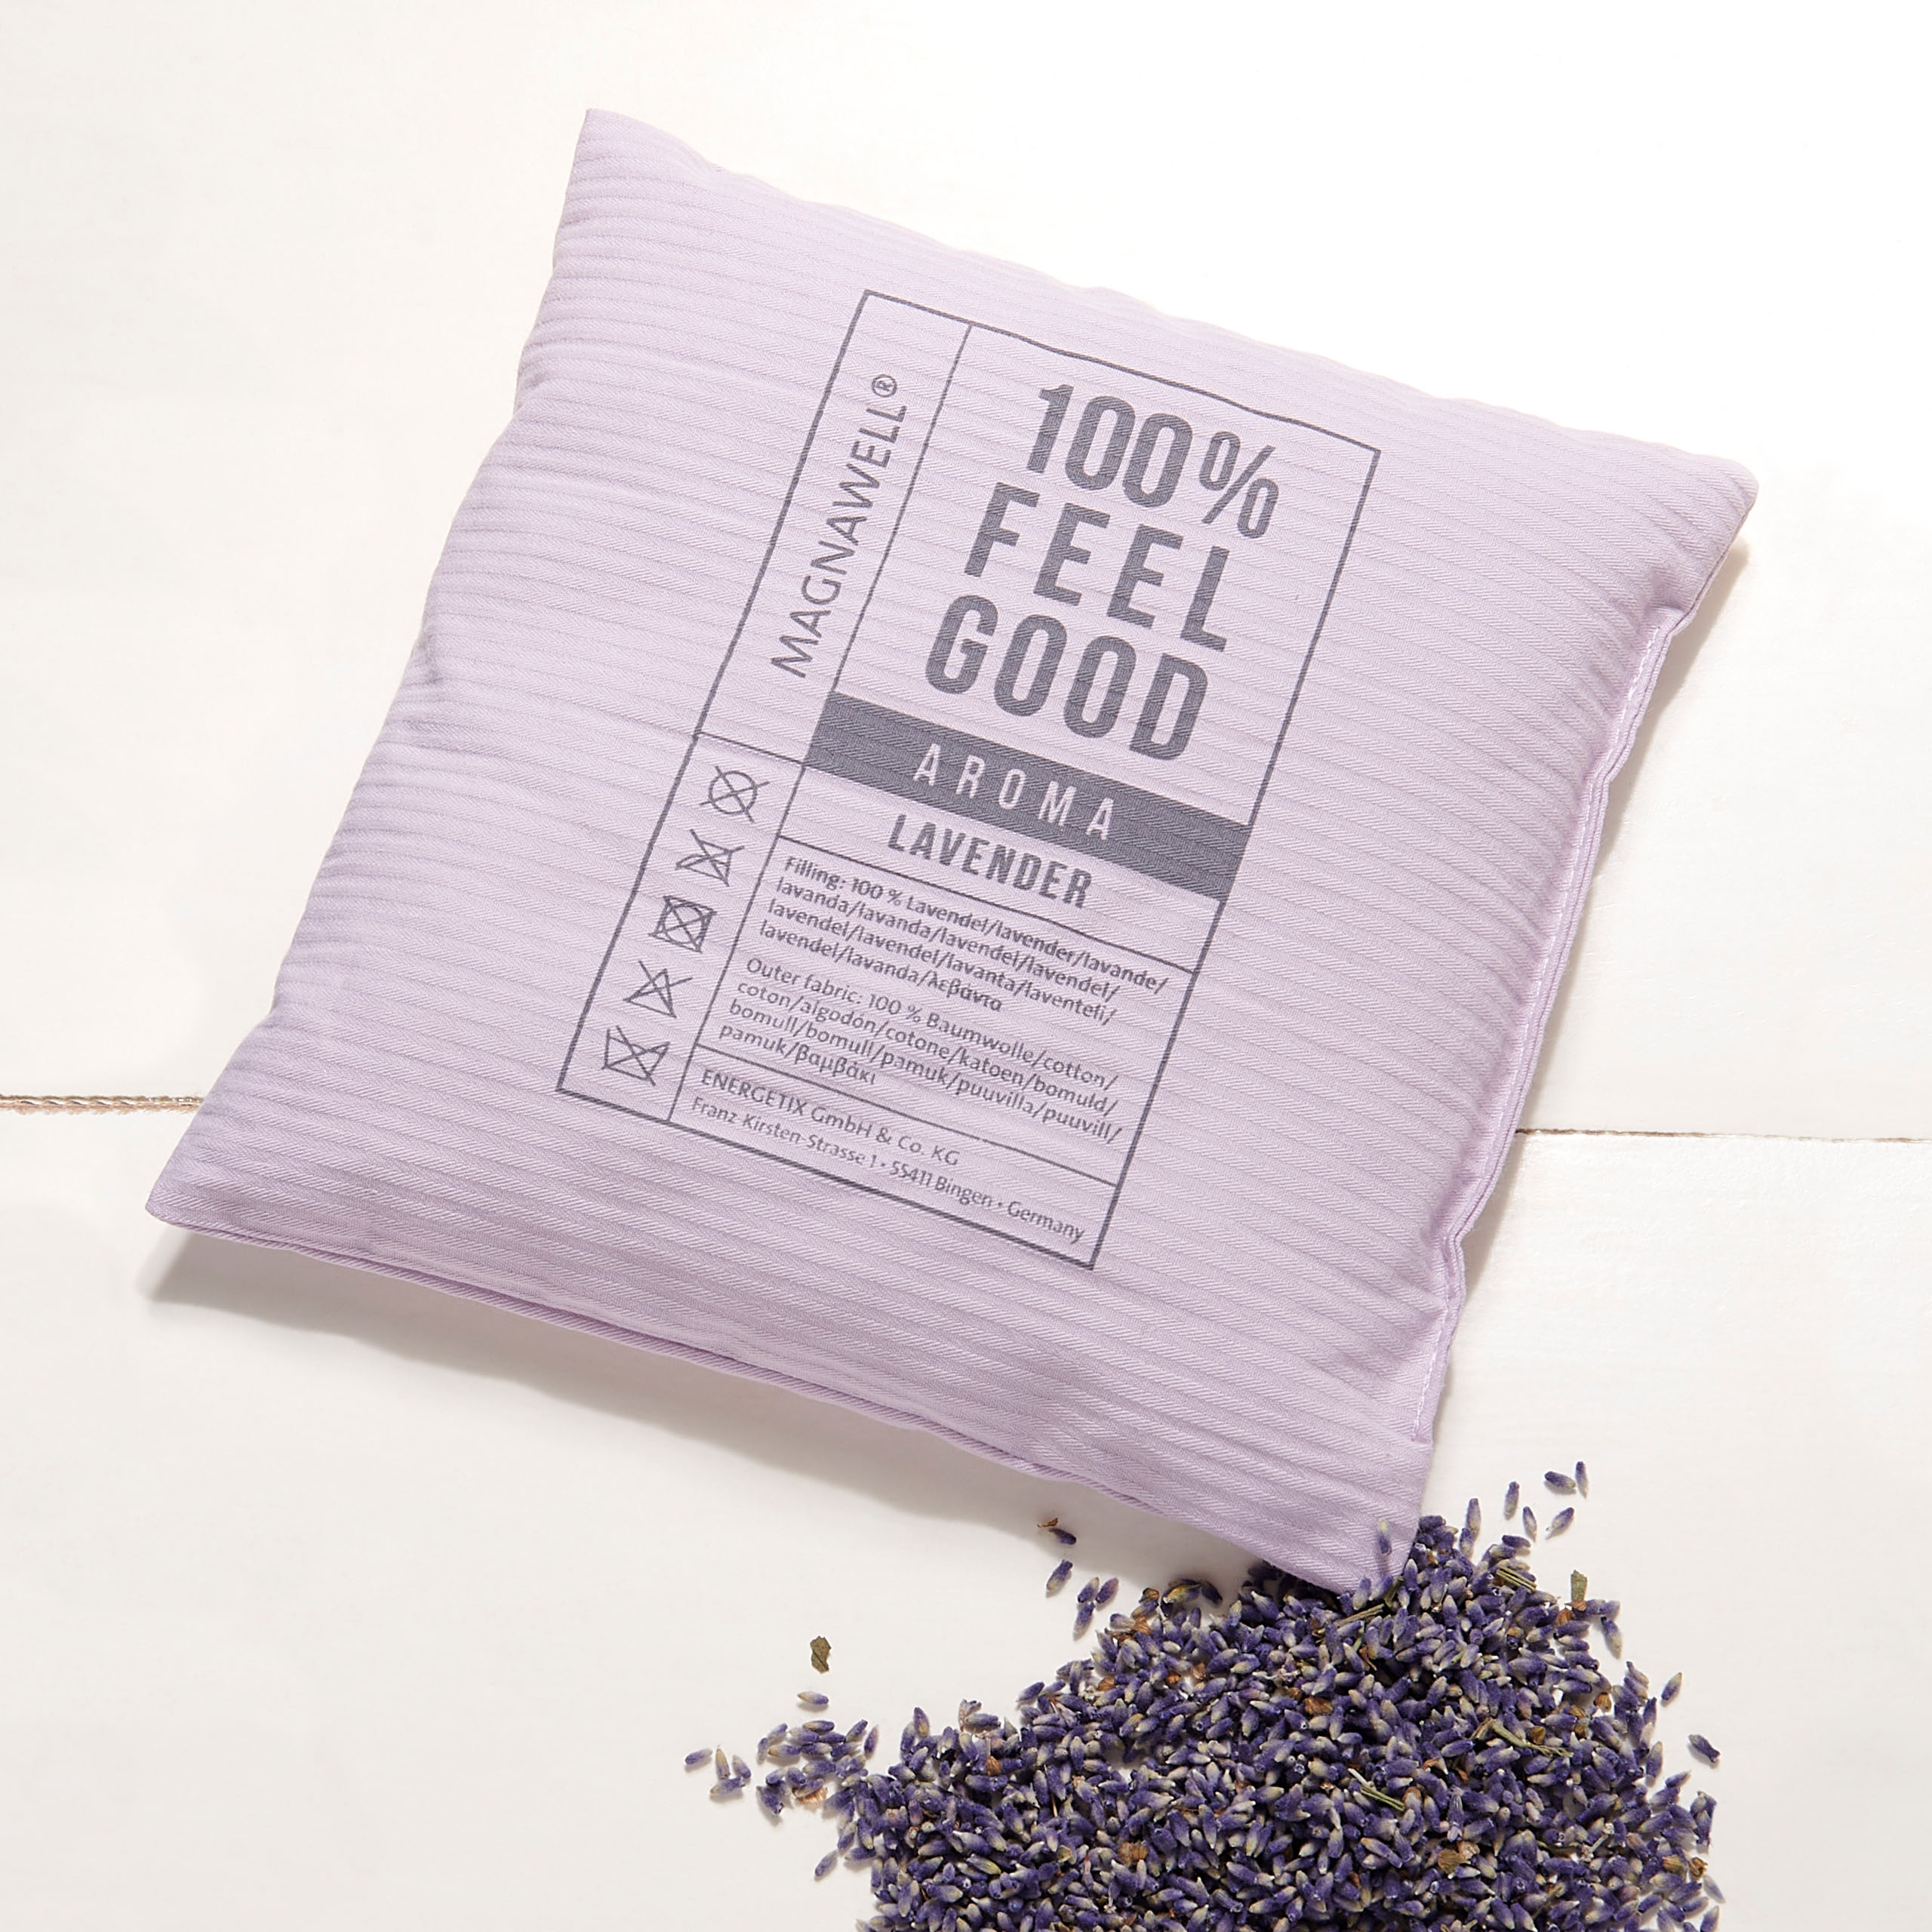 Coussin de relaxation AROMA pour 100 % Feel Good